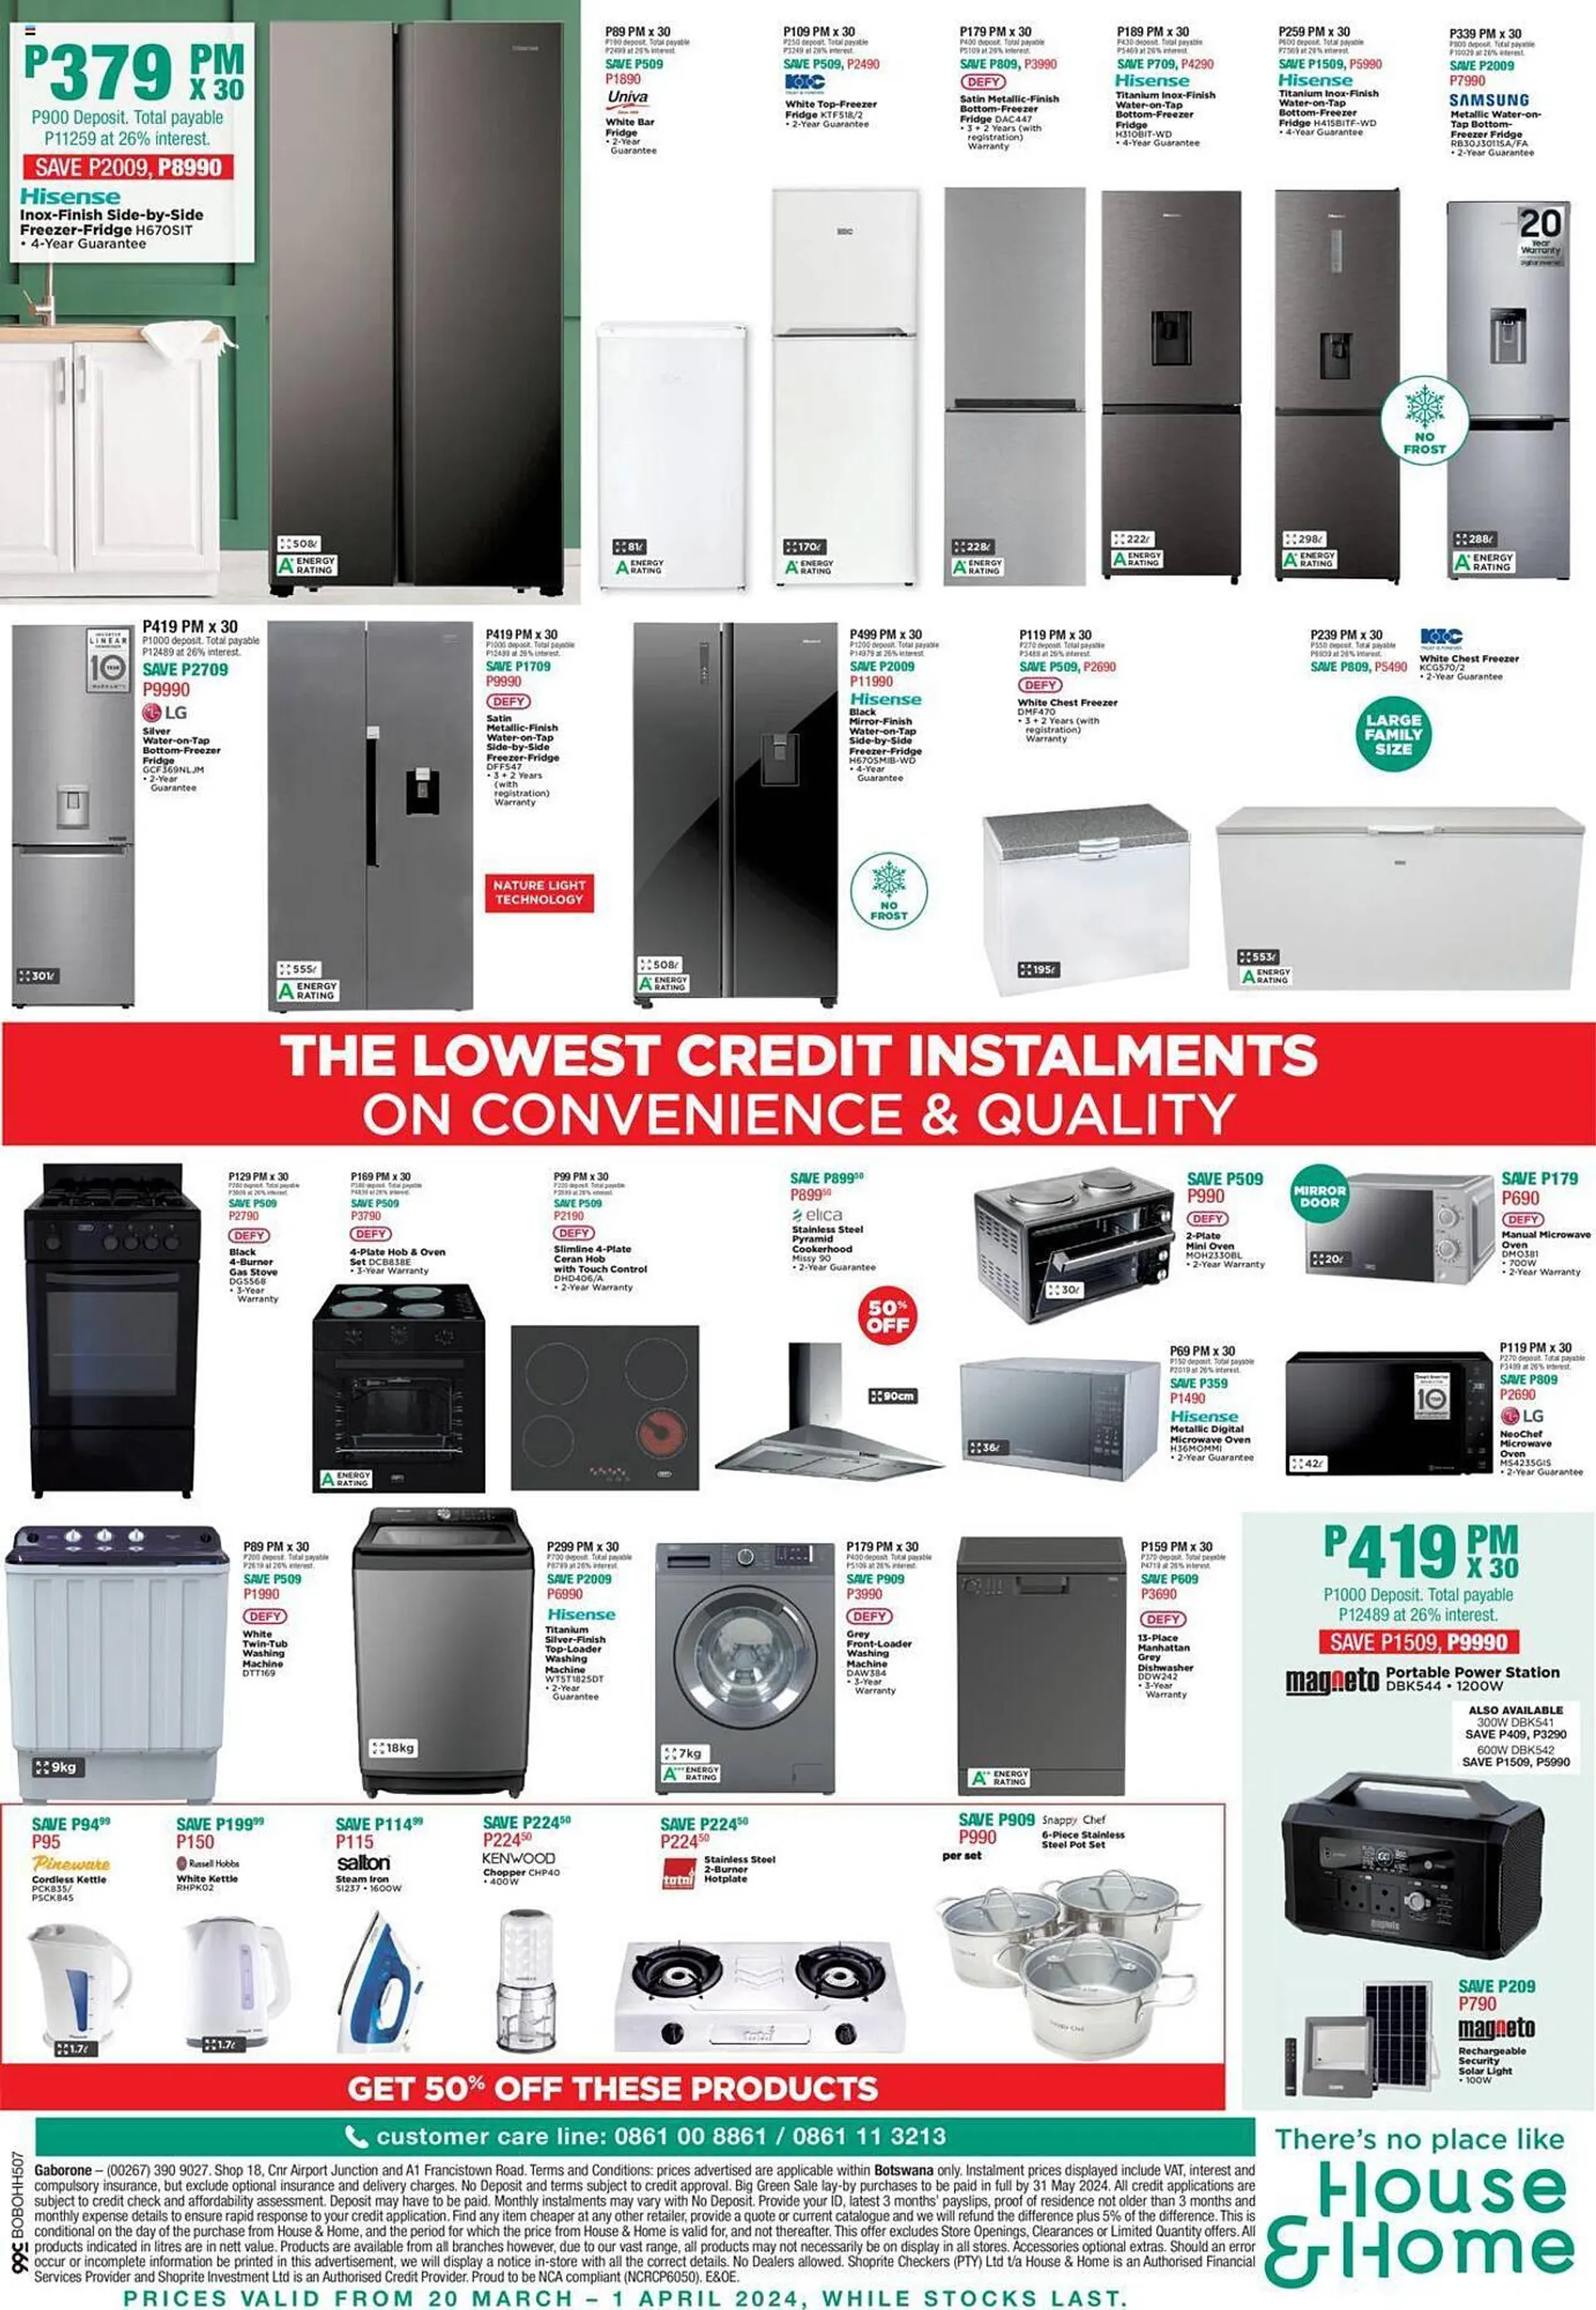 House & Home catalogue - 20 March 1 April 2024 - Page 4